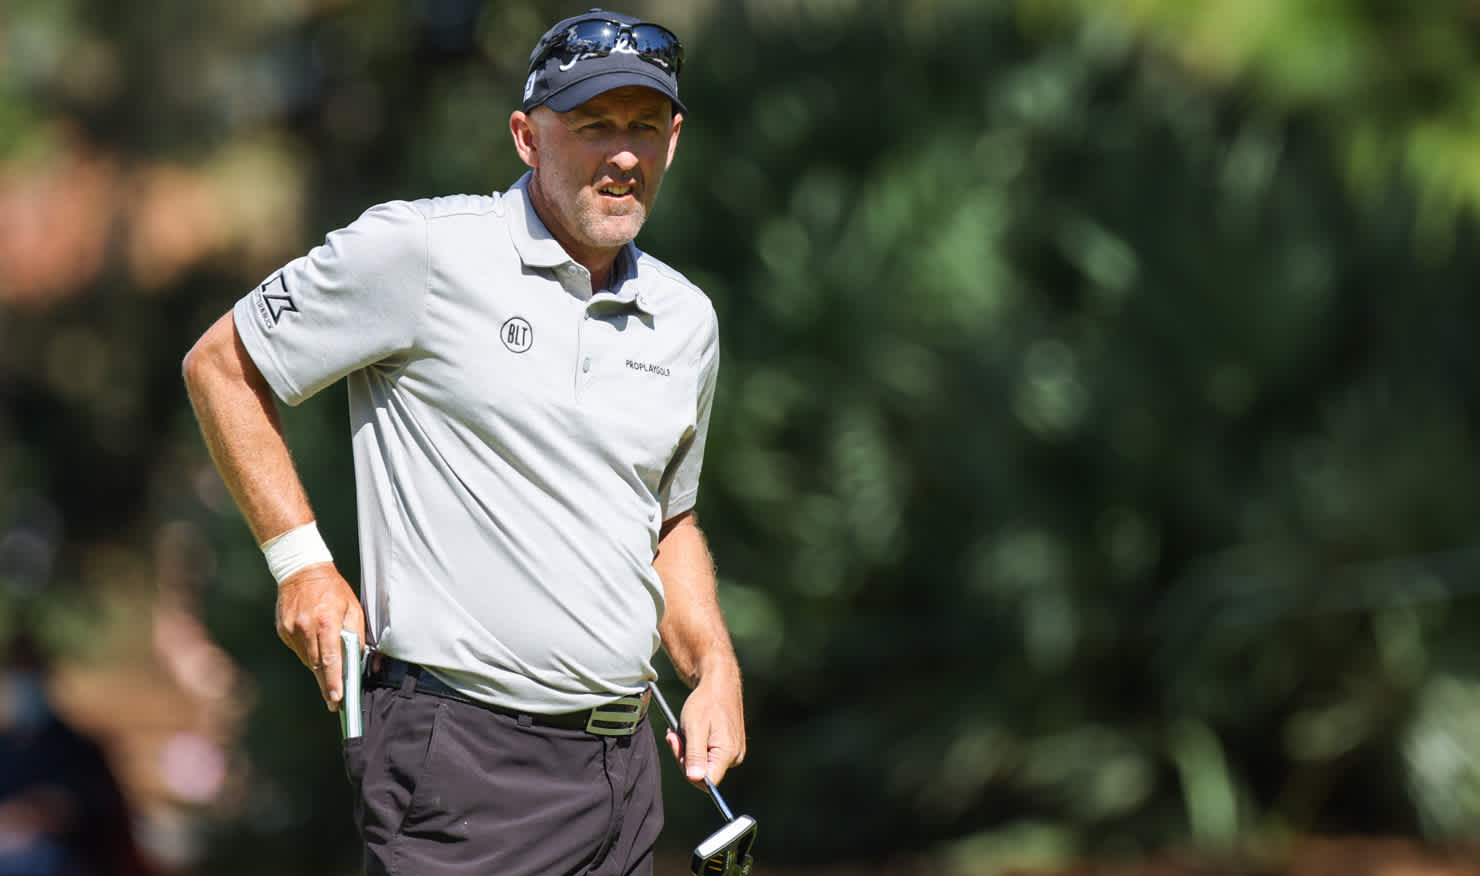 Cam Percy distinguished himself at the island hole on debut at the Players Championship.